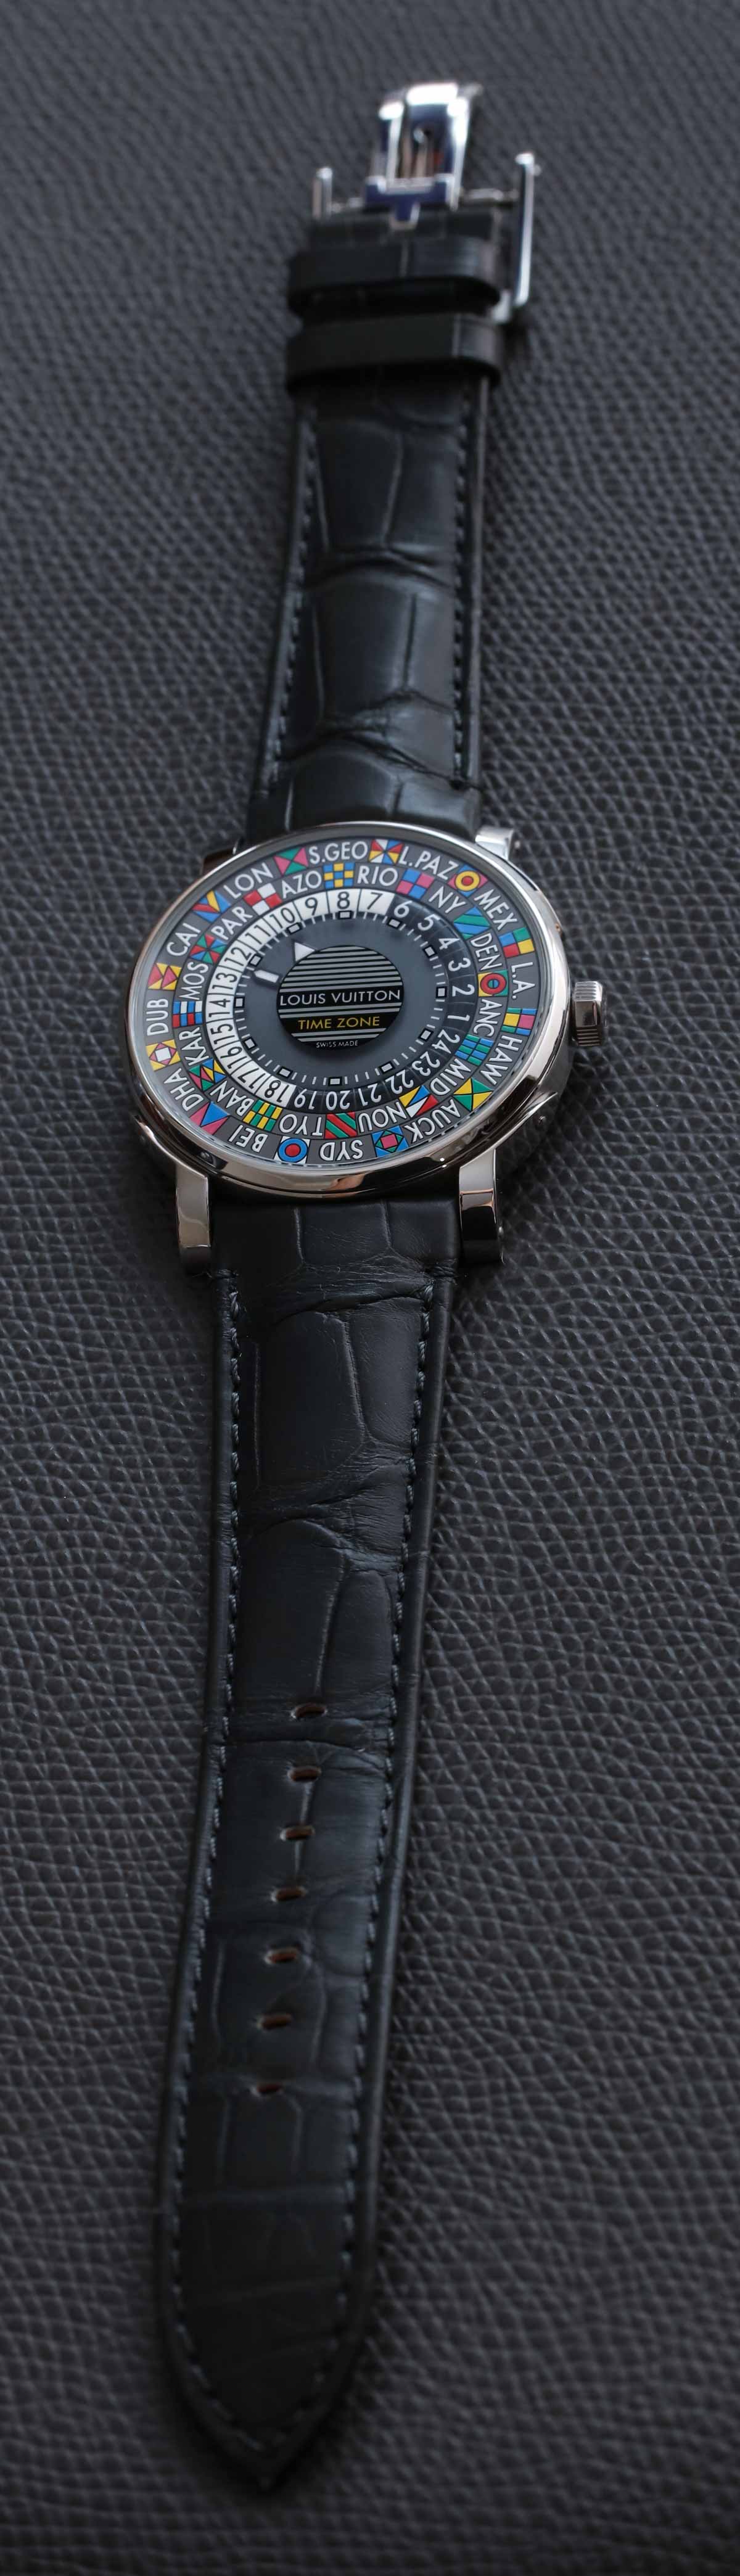 The Escale Time Zone, A New Manufacture World-Timer by Louis Vuitton -  Hodinkee